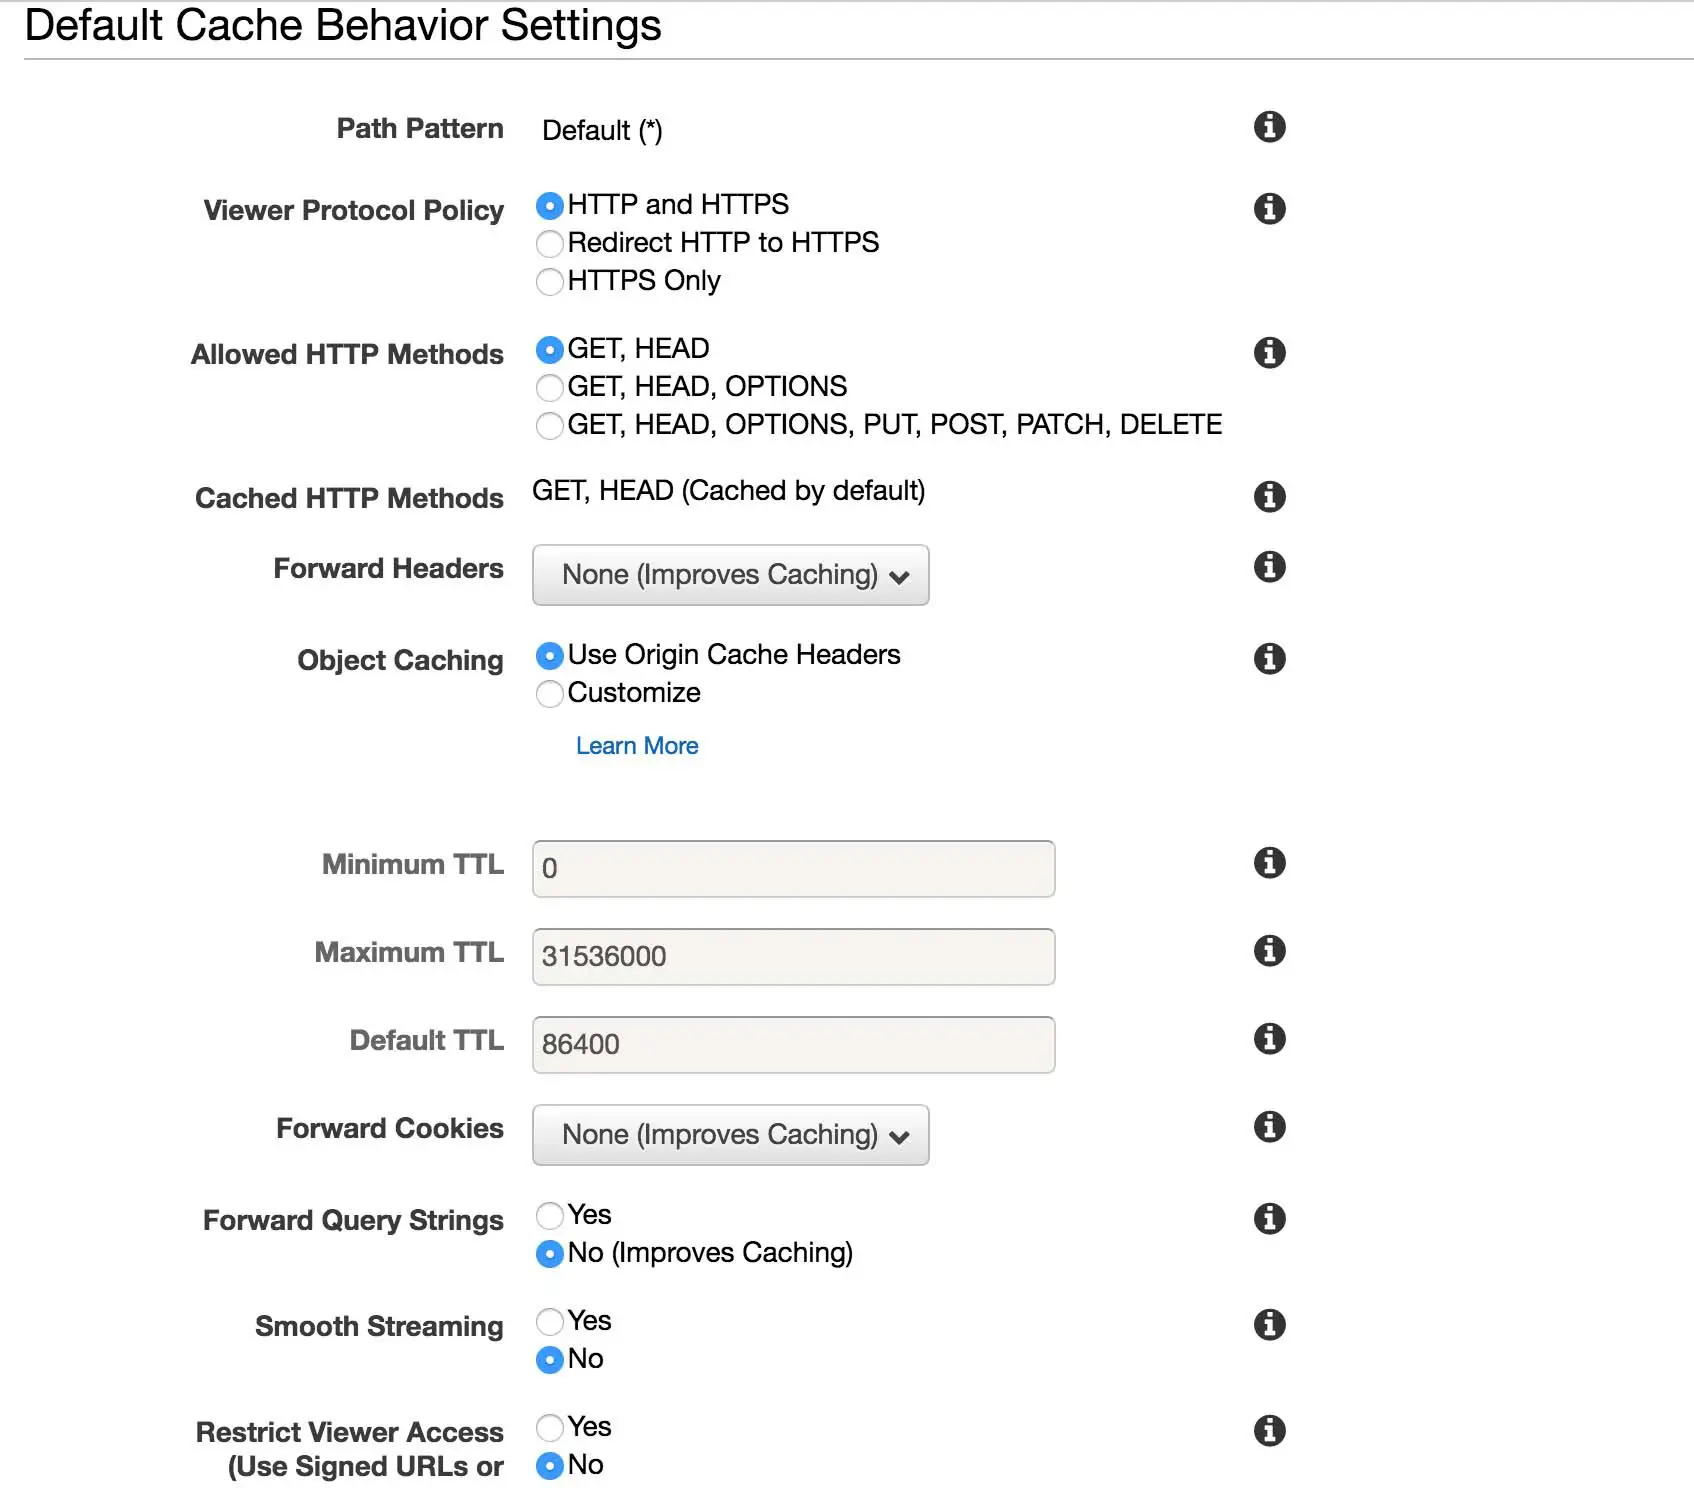 Default Cache Behavior Settings for cloudfront with drupal